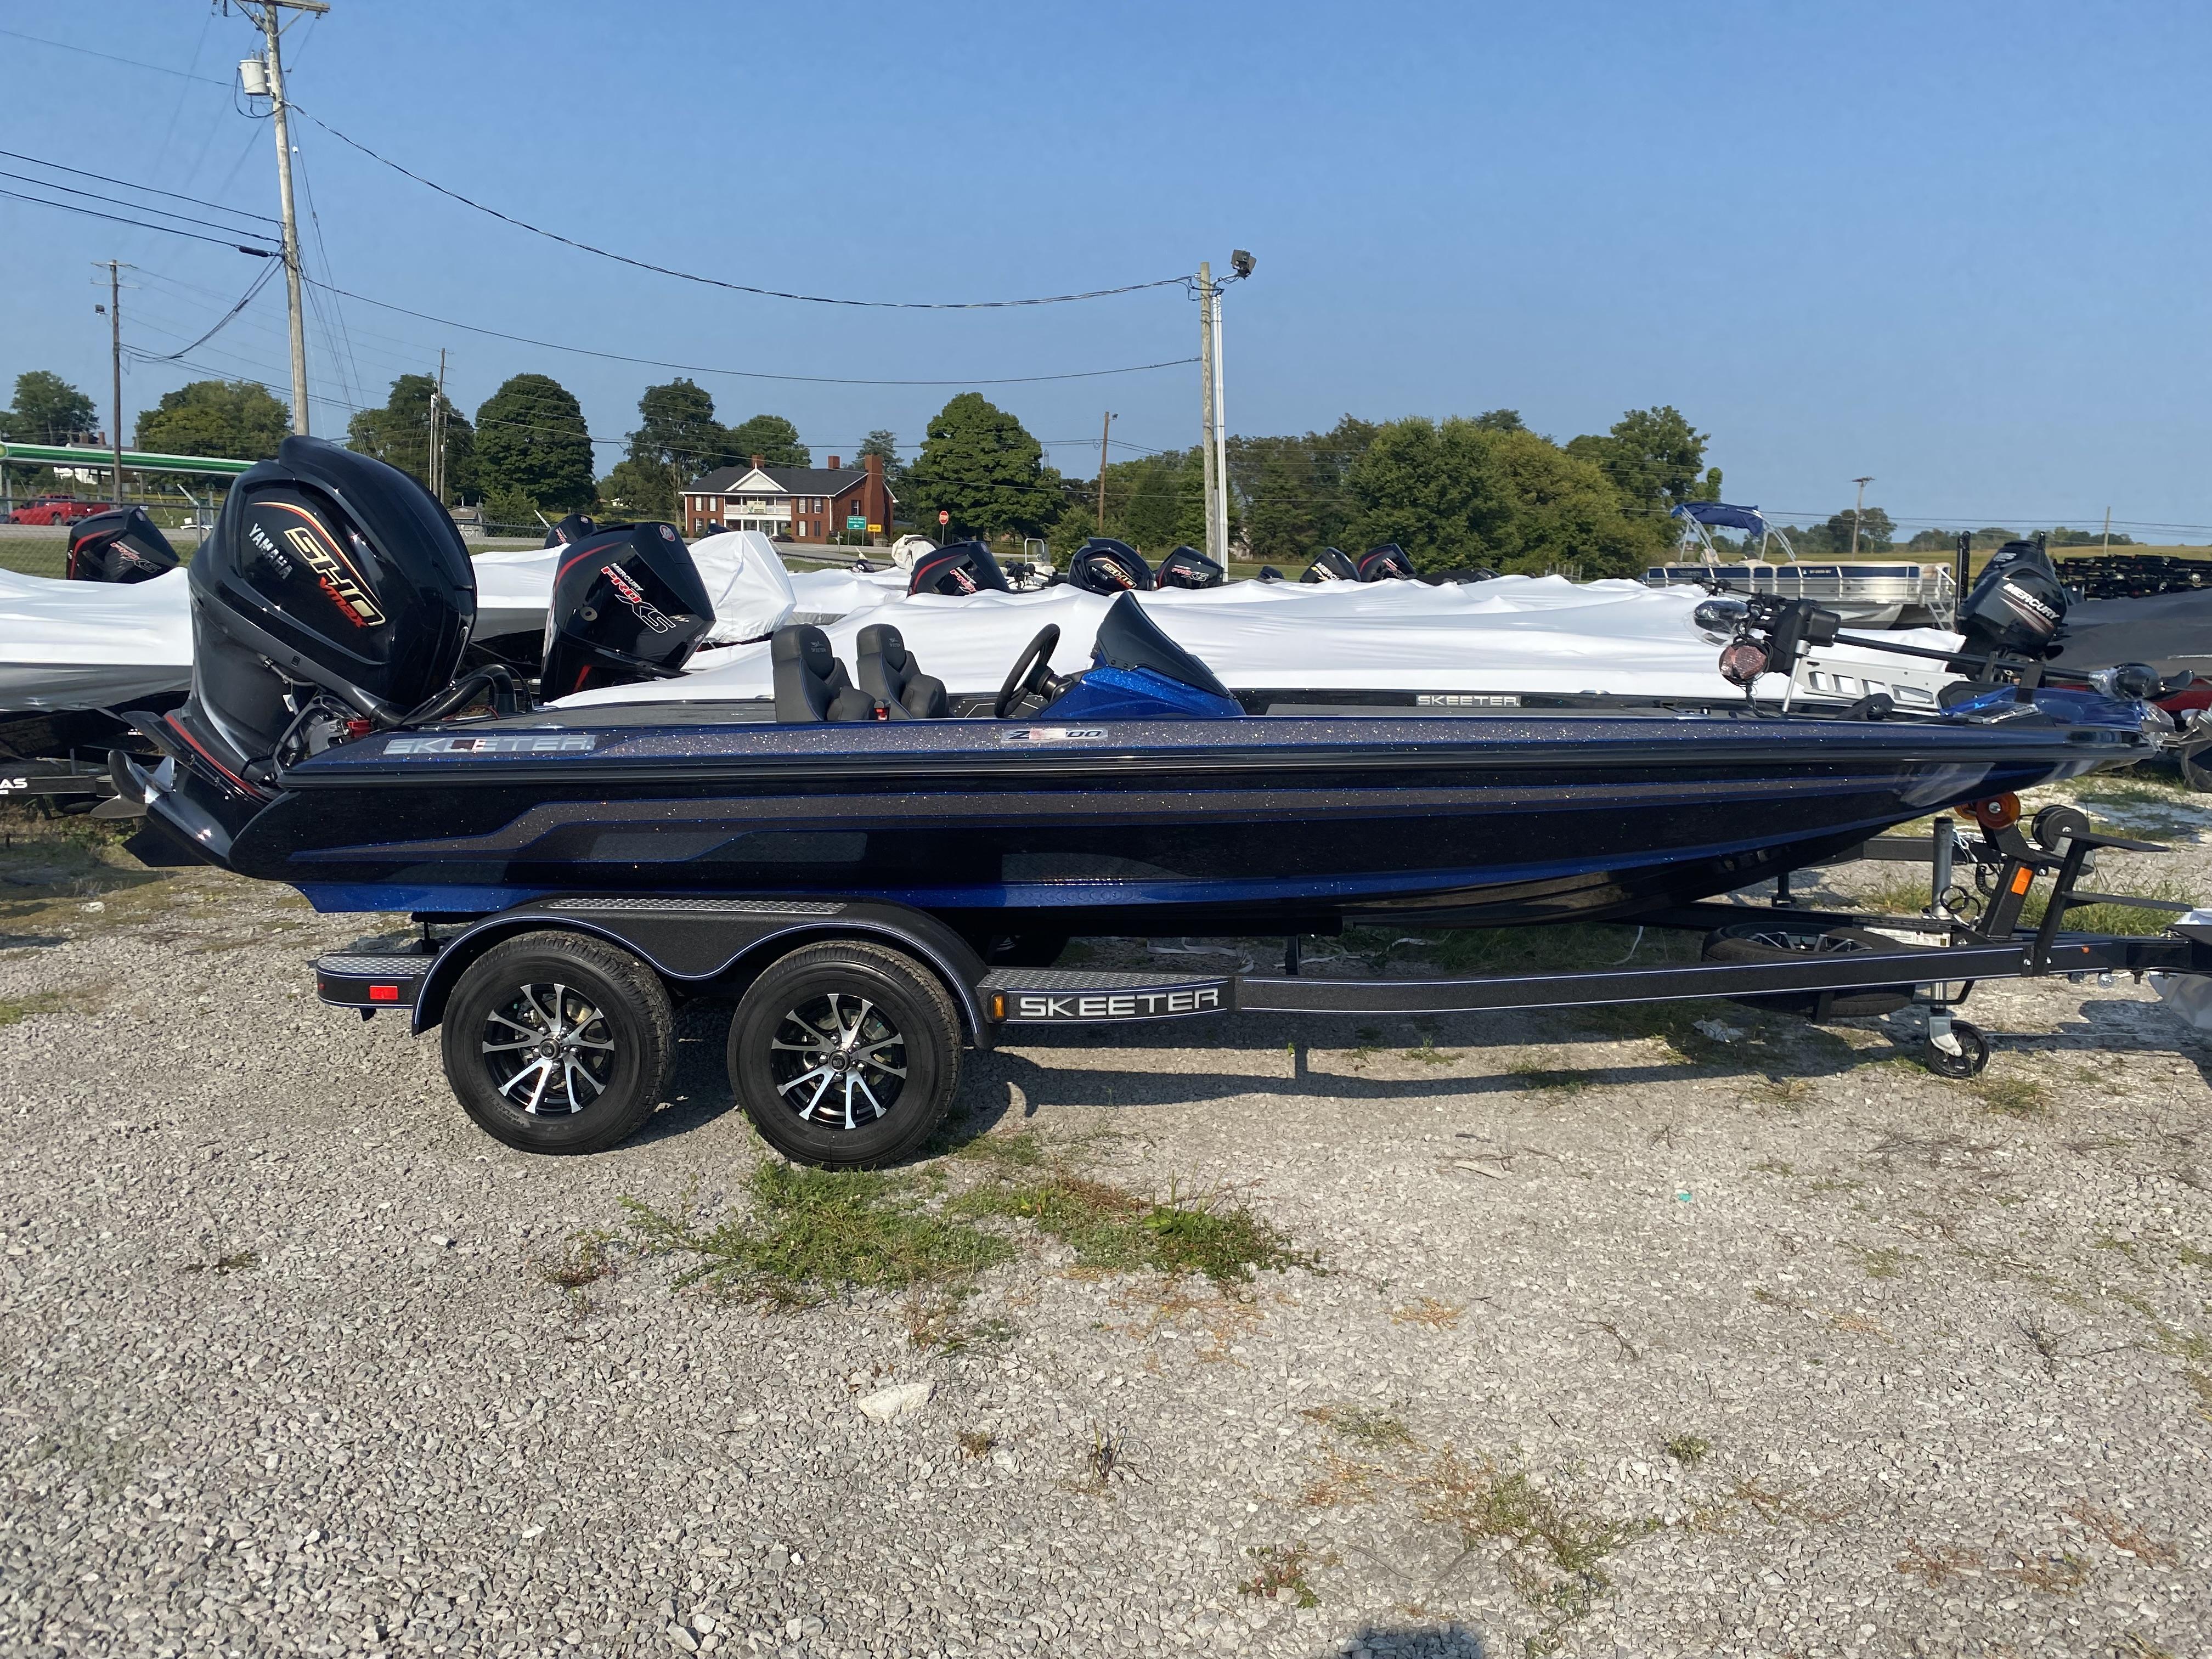 Skeeter ZX 200 boats for sale - boats.com